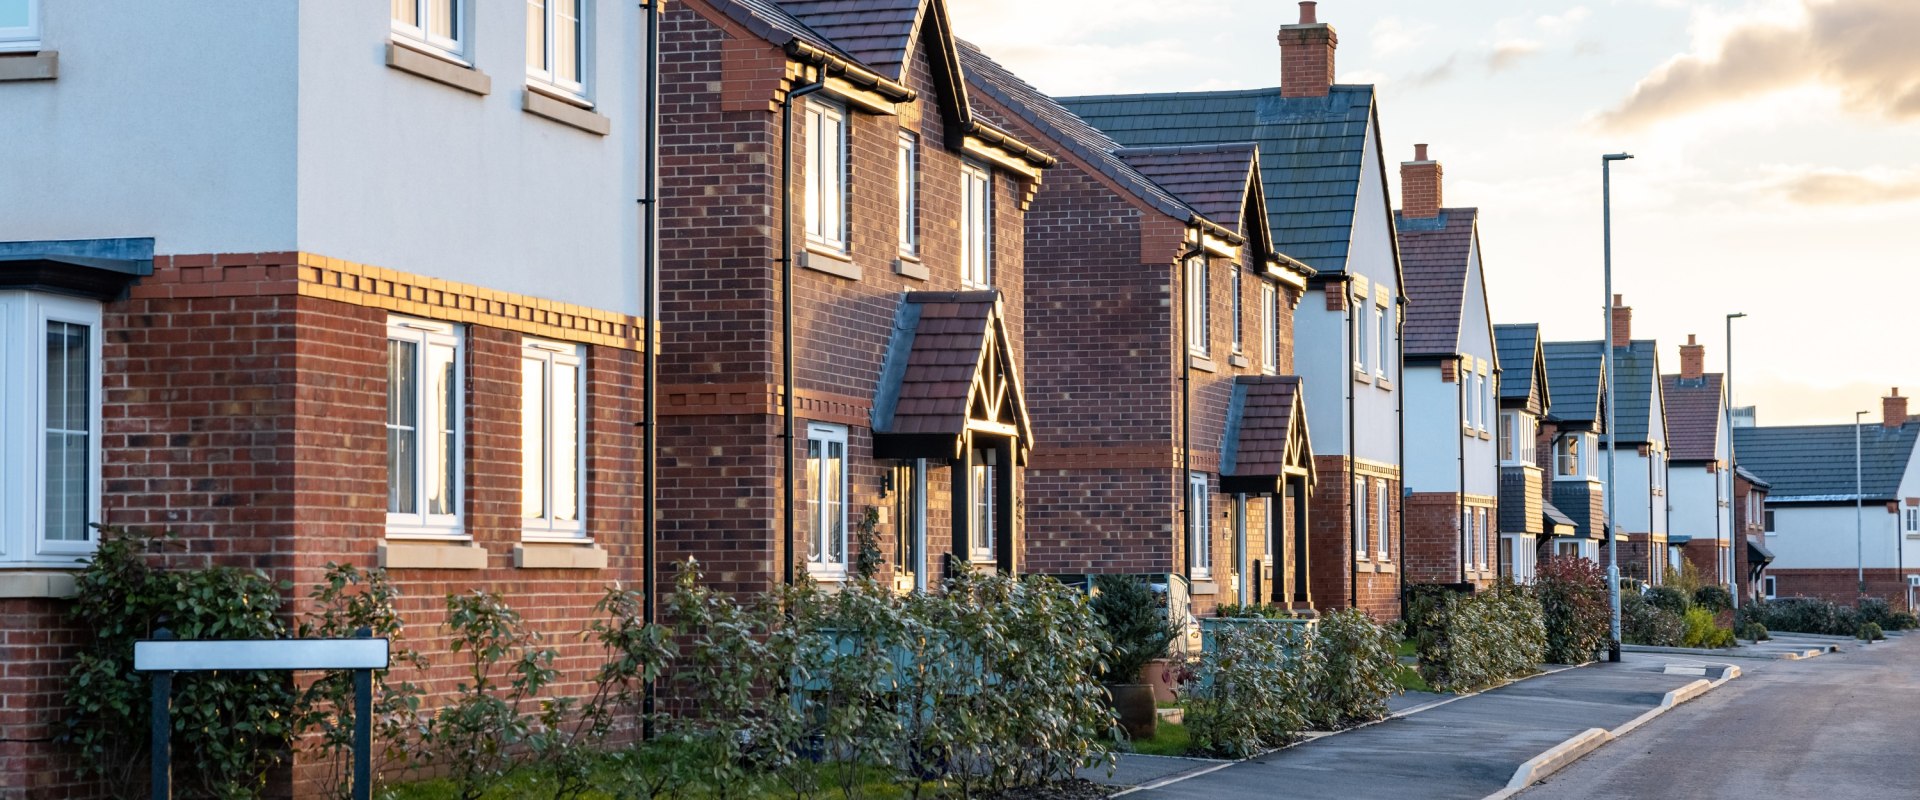 Why Buy-to-Let Mortgages Cost More